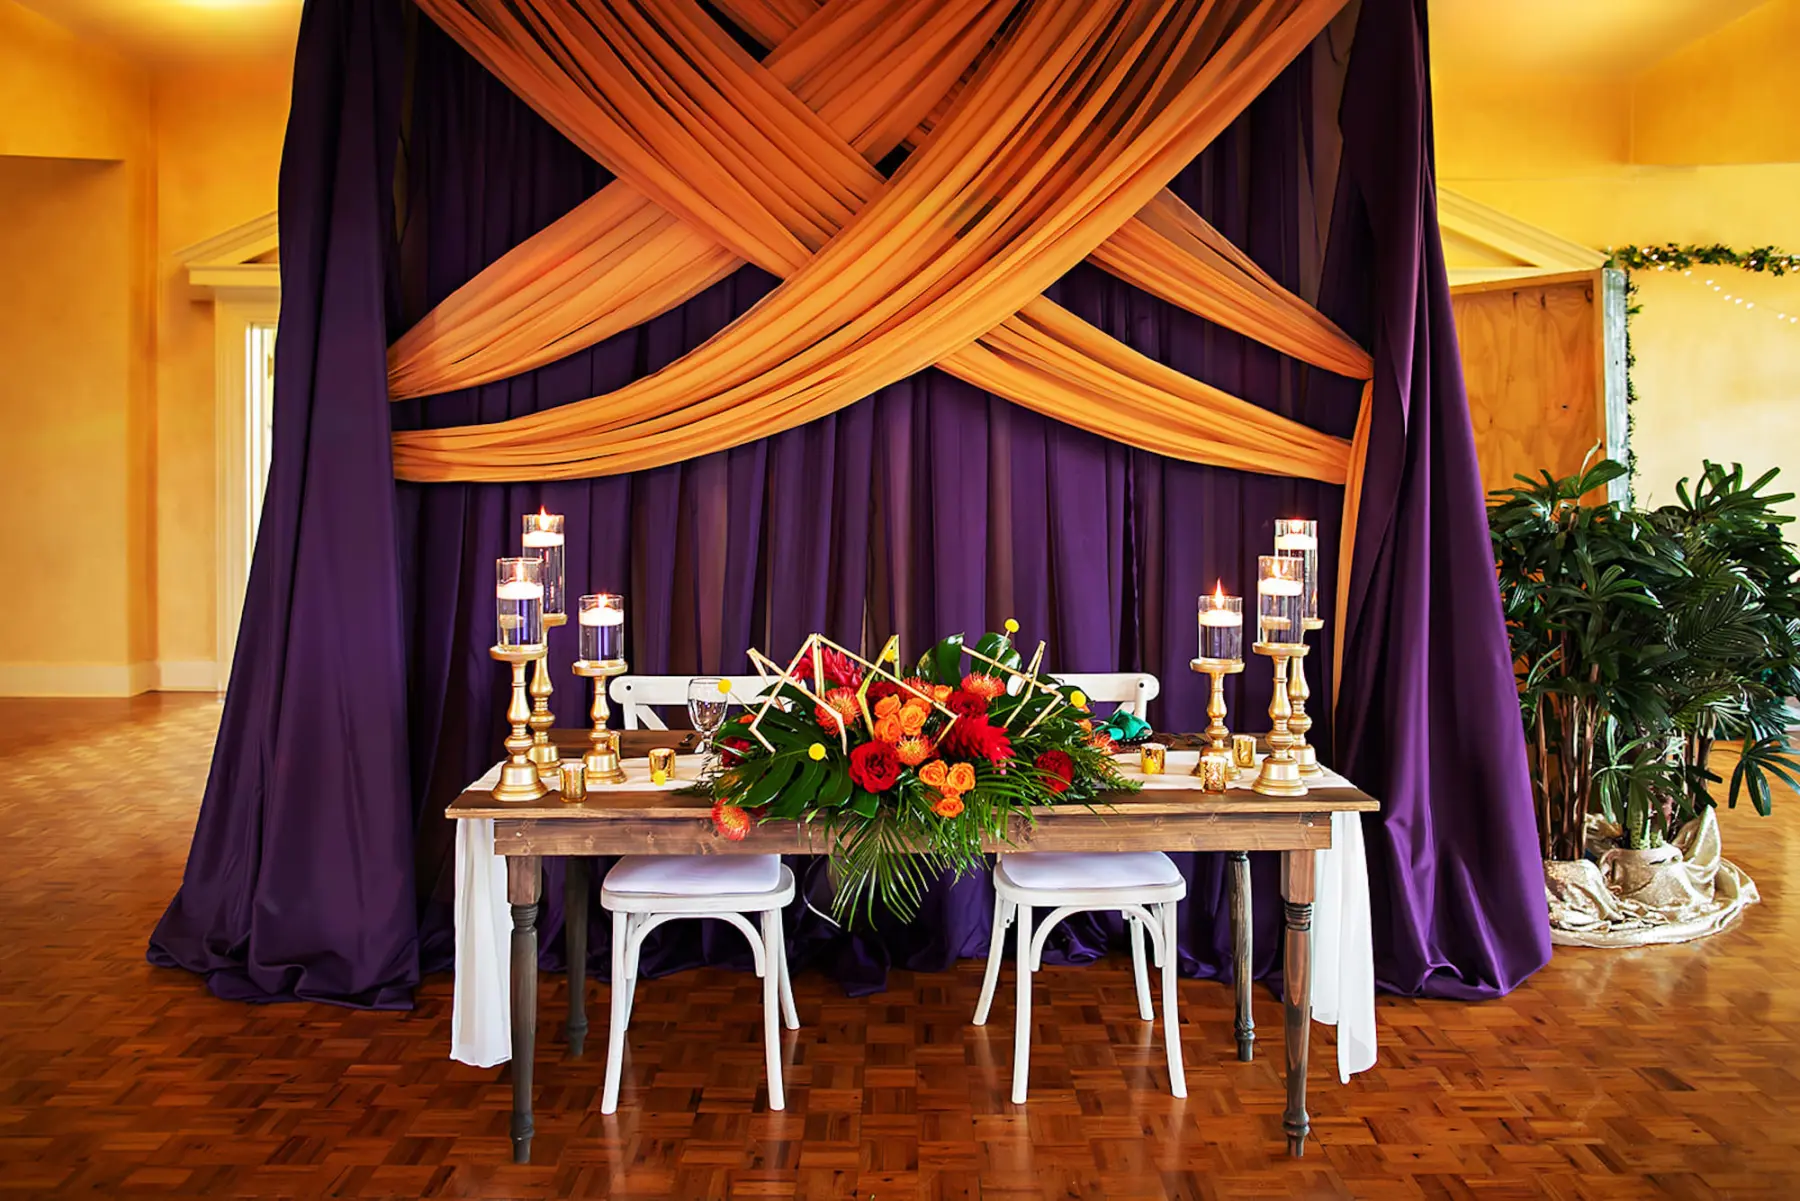 Colorful Geometric Tropical Wedding Reception Sweetheart Table with Orange and Purple Drapery Ideas | Orange Roses and Pincushion Protea, Red Ginger, Carnations, Monstera Leaf, Palm Leaf Floral Decor Inspiration | Tampa Bay Outside The Box Rentals